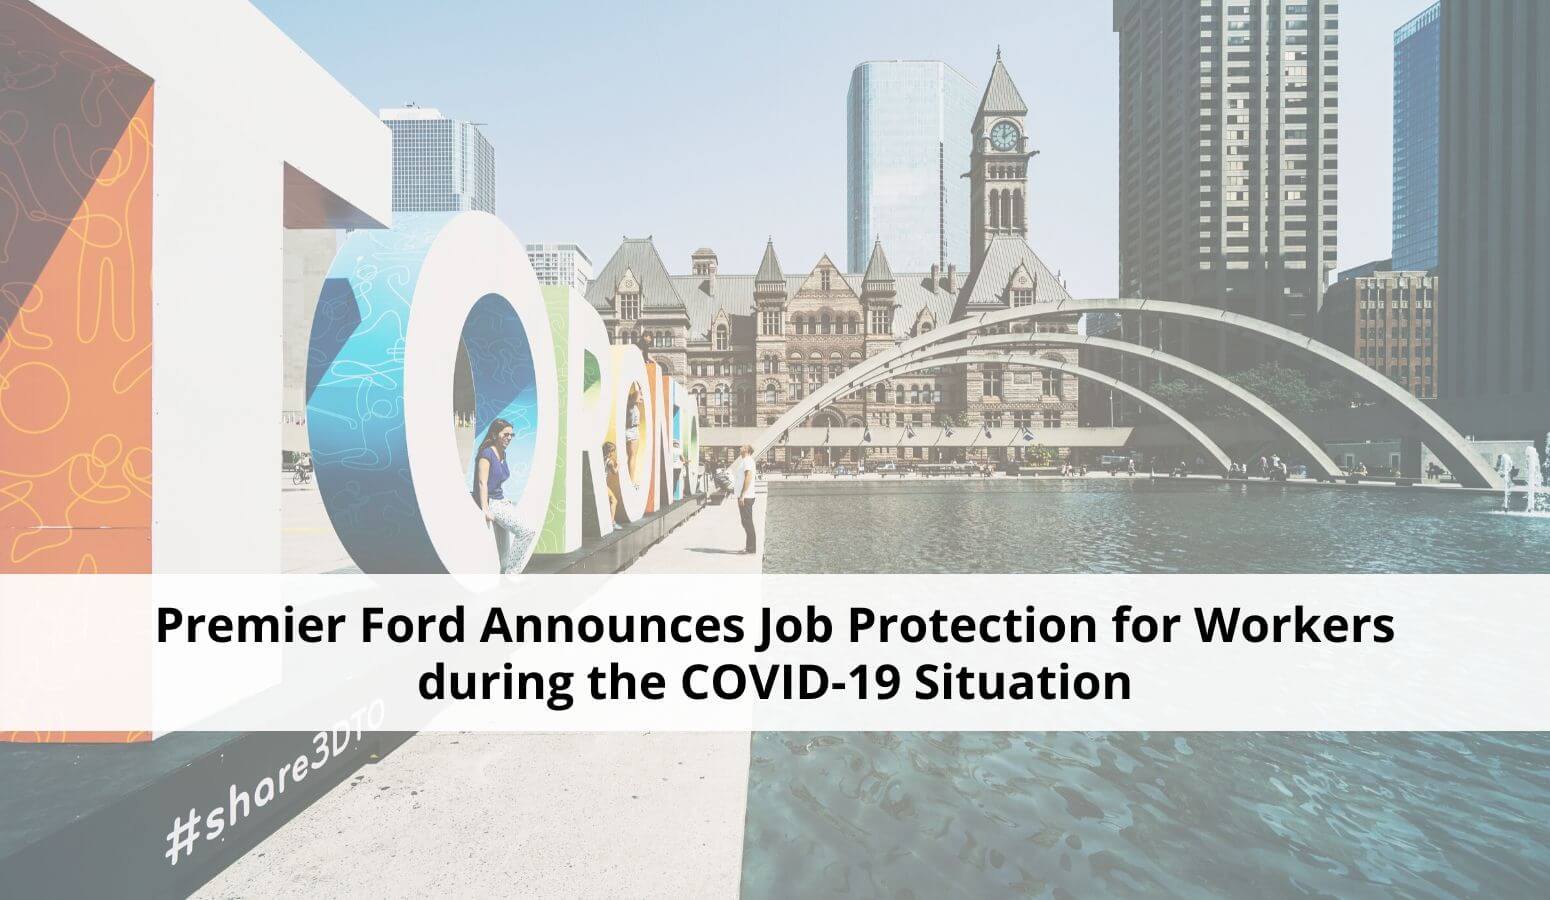 Featured image for “Premier Ford Announces Job Protection for Workers during the COVID-19 Situation”